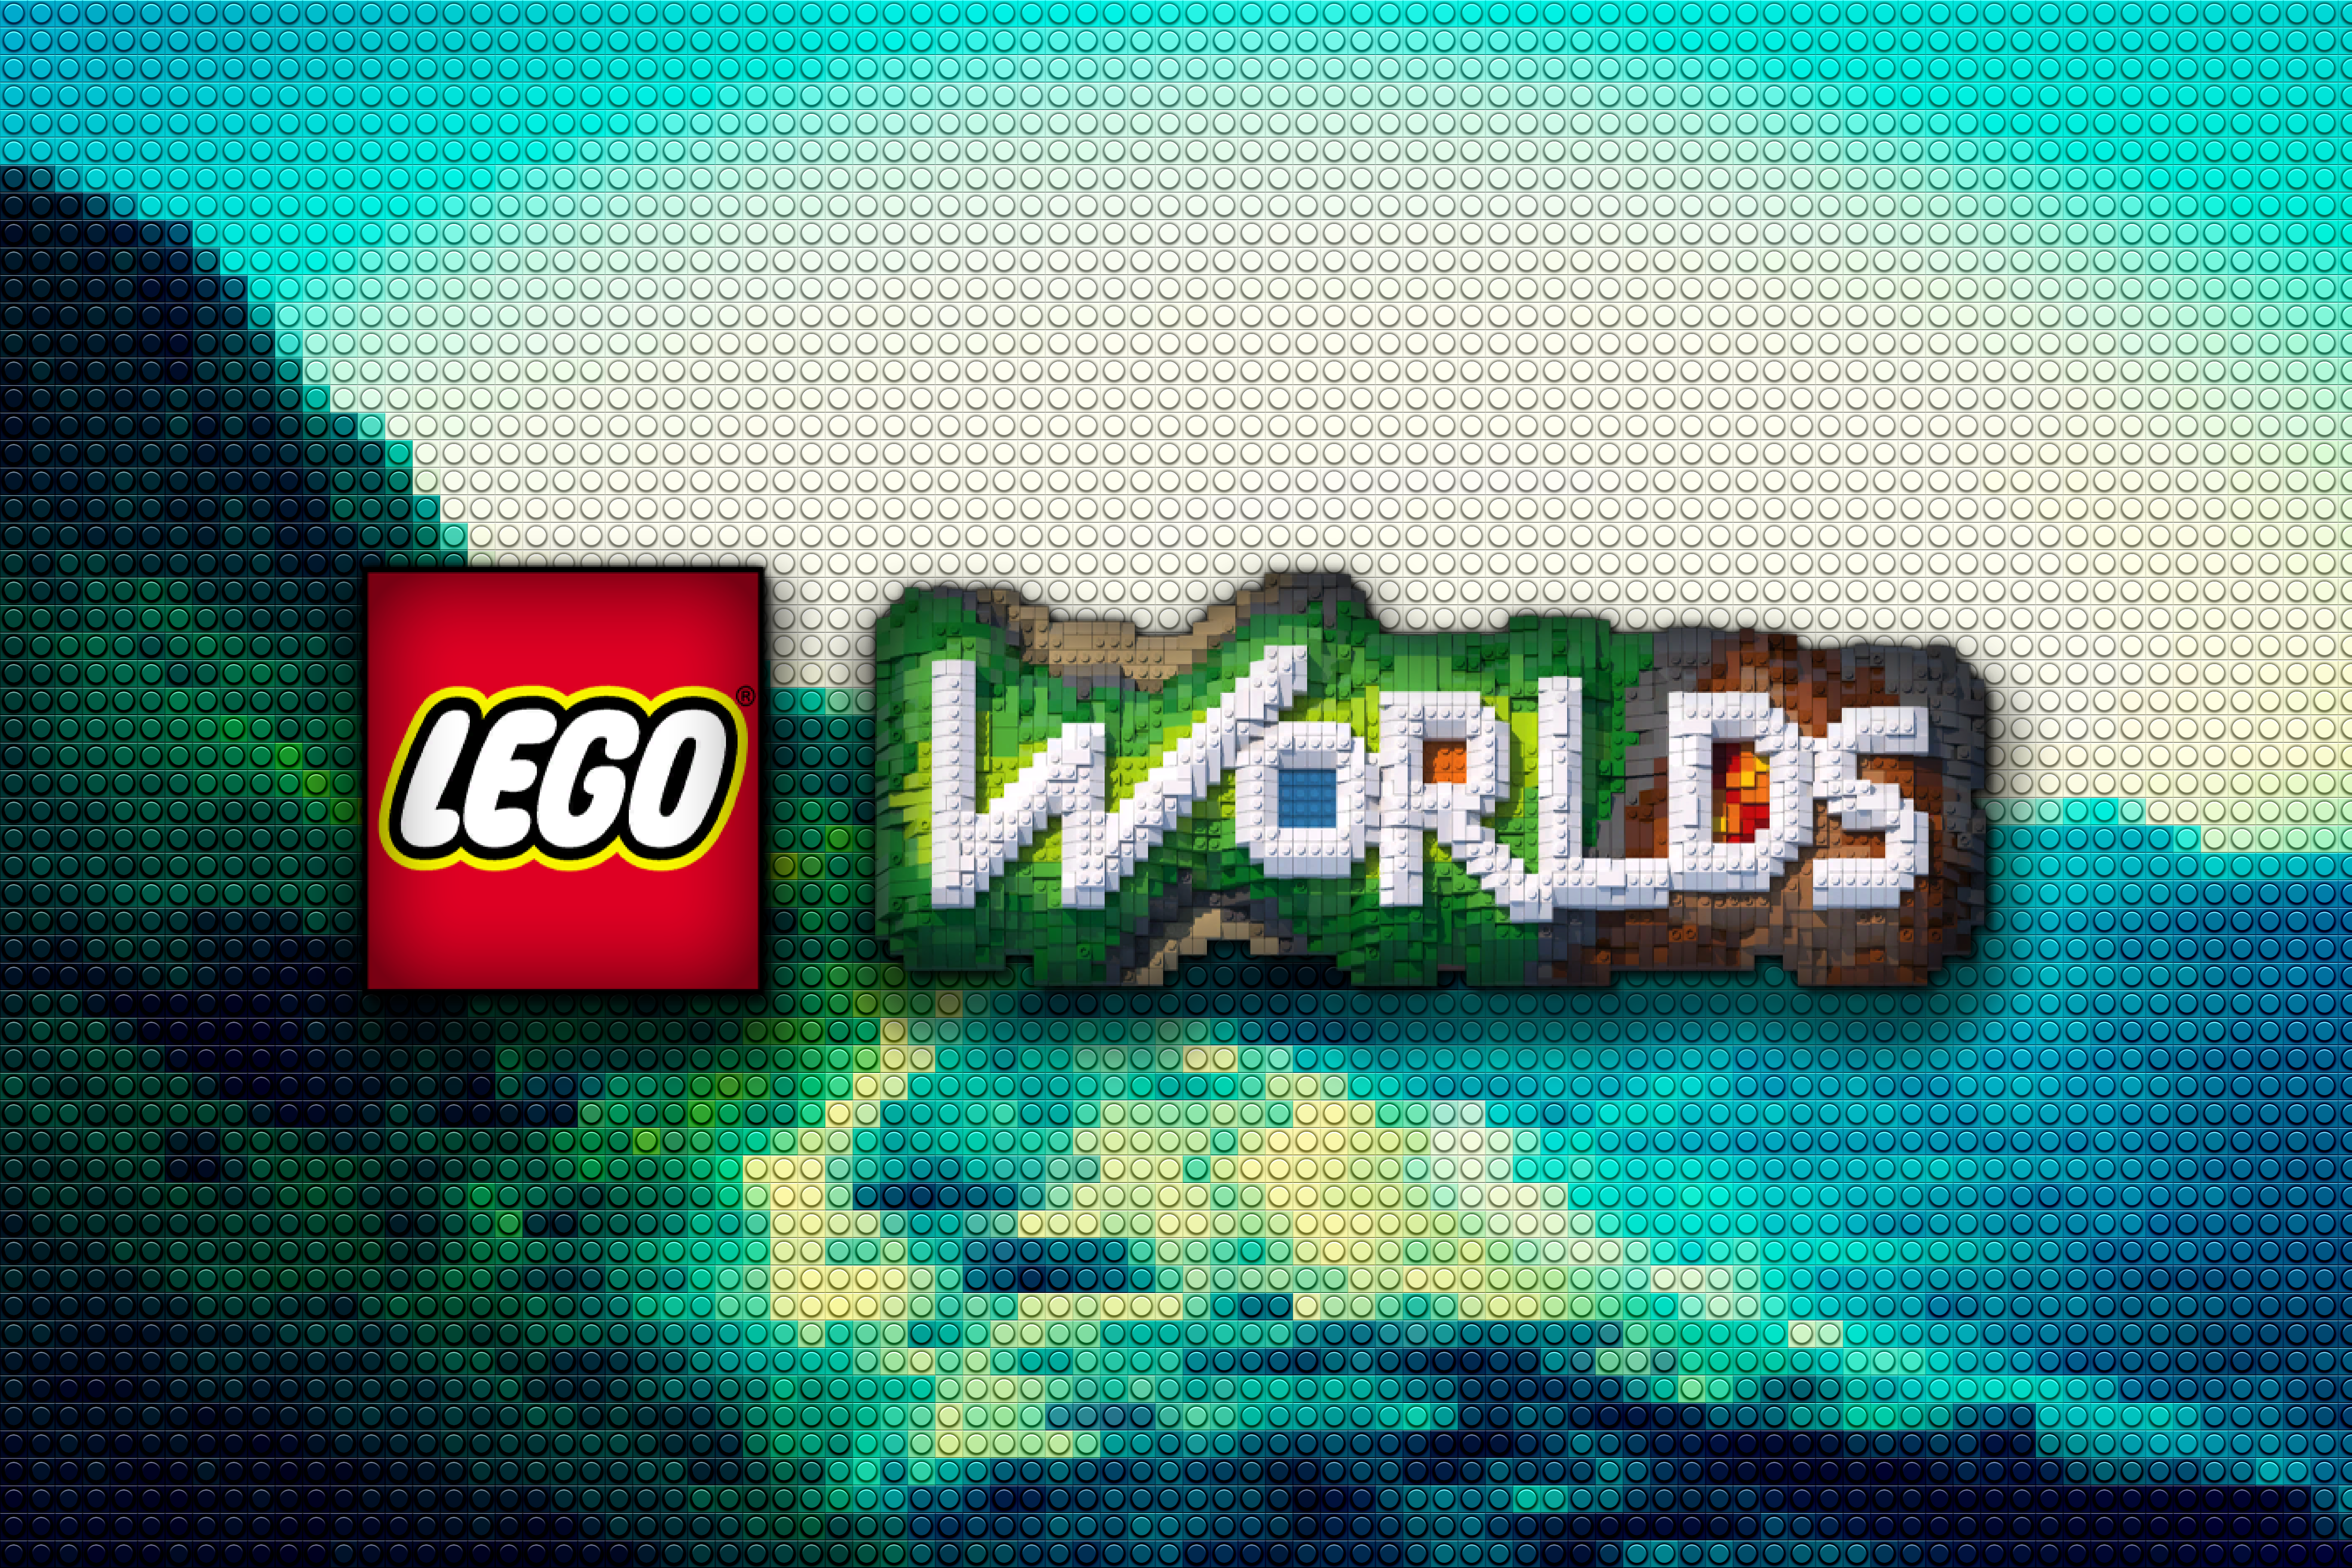 A Lego Worlds wallpaper I made